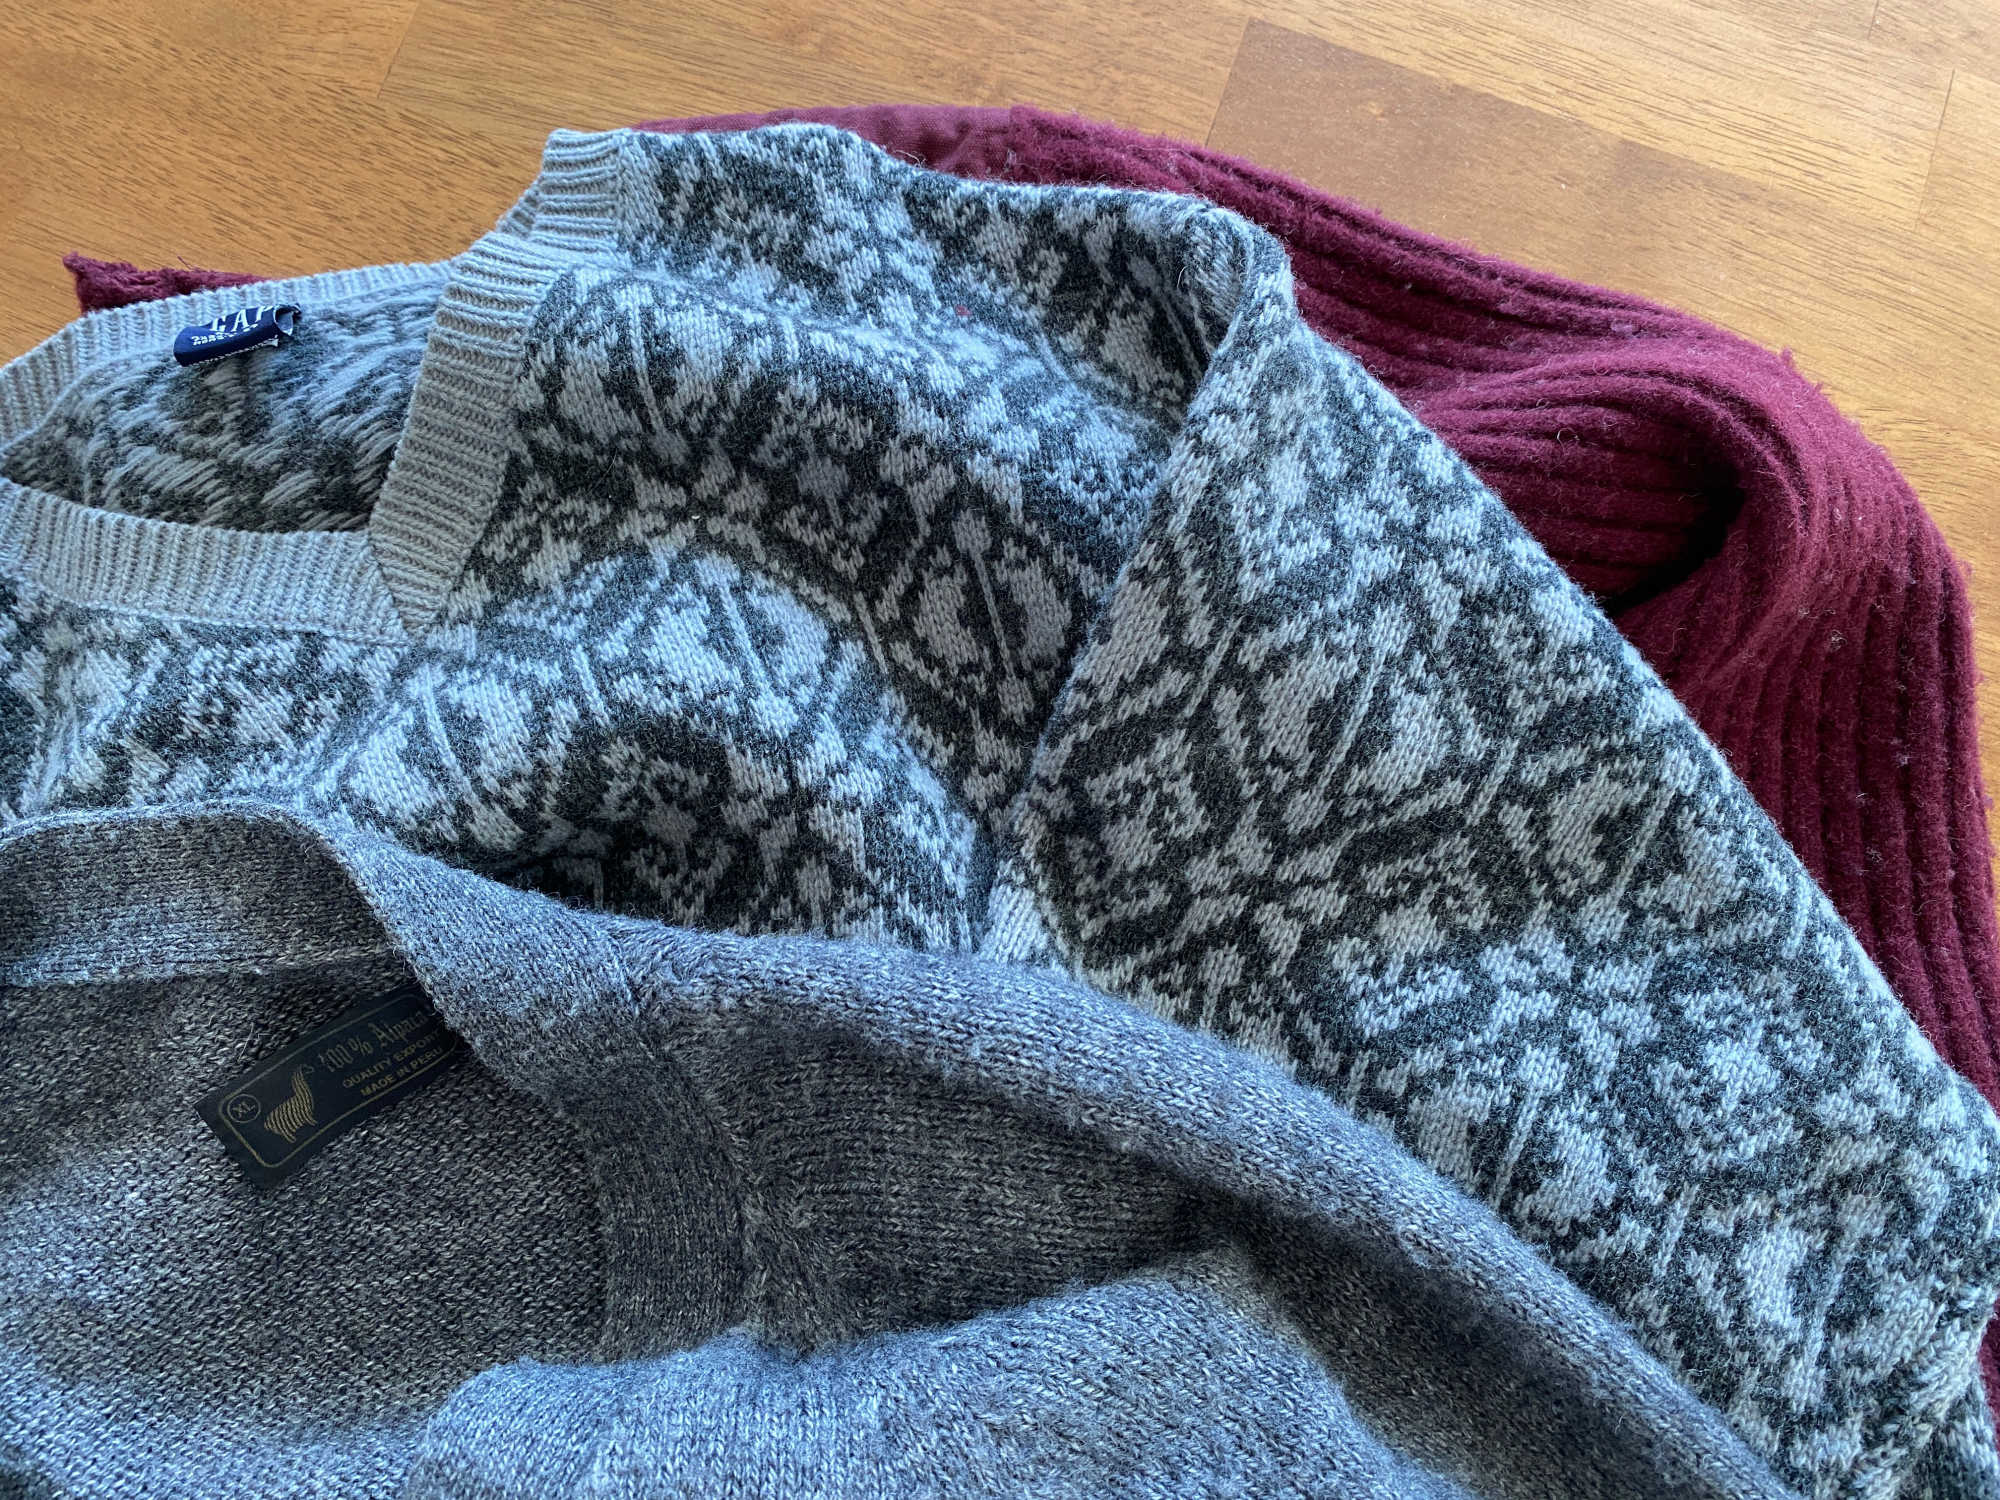 Two wool sweaters (one grey, one maroon), lying on a wooden table. The sweaters have been thrifted from a local Deseret Industries.